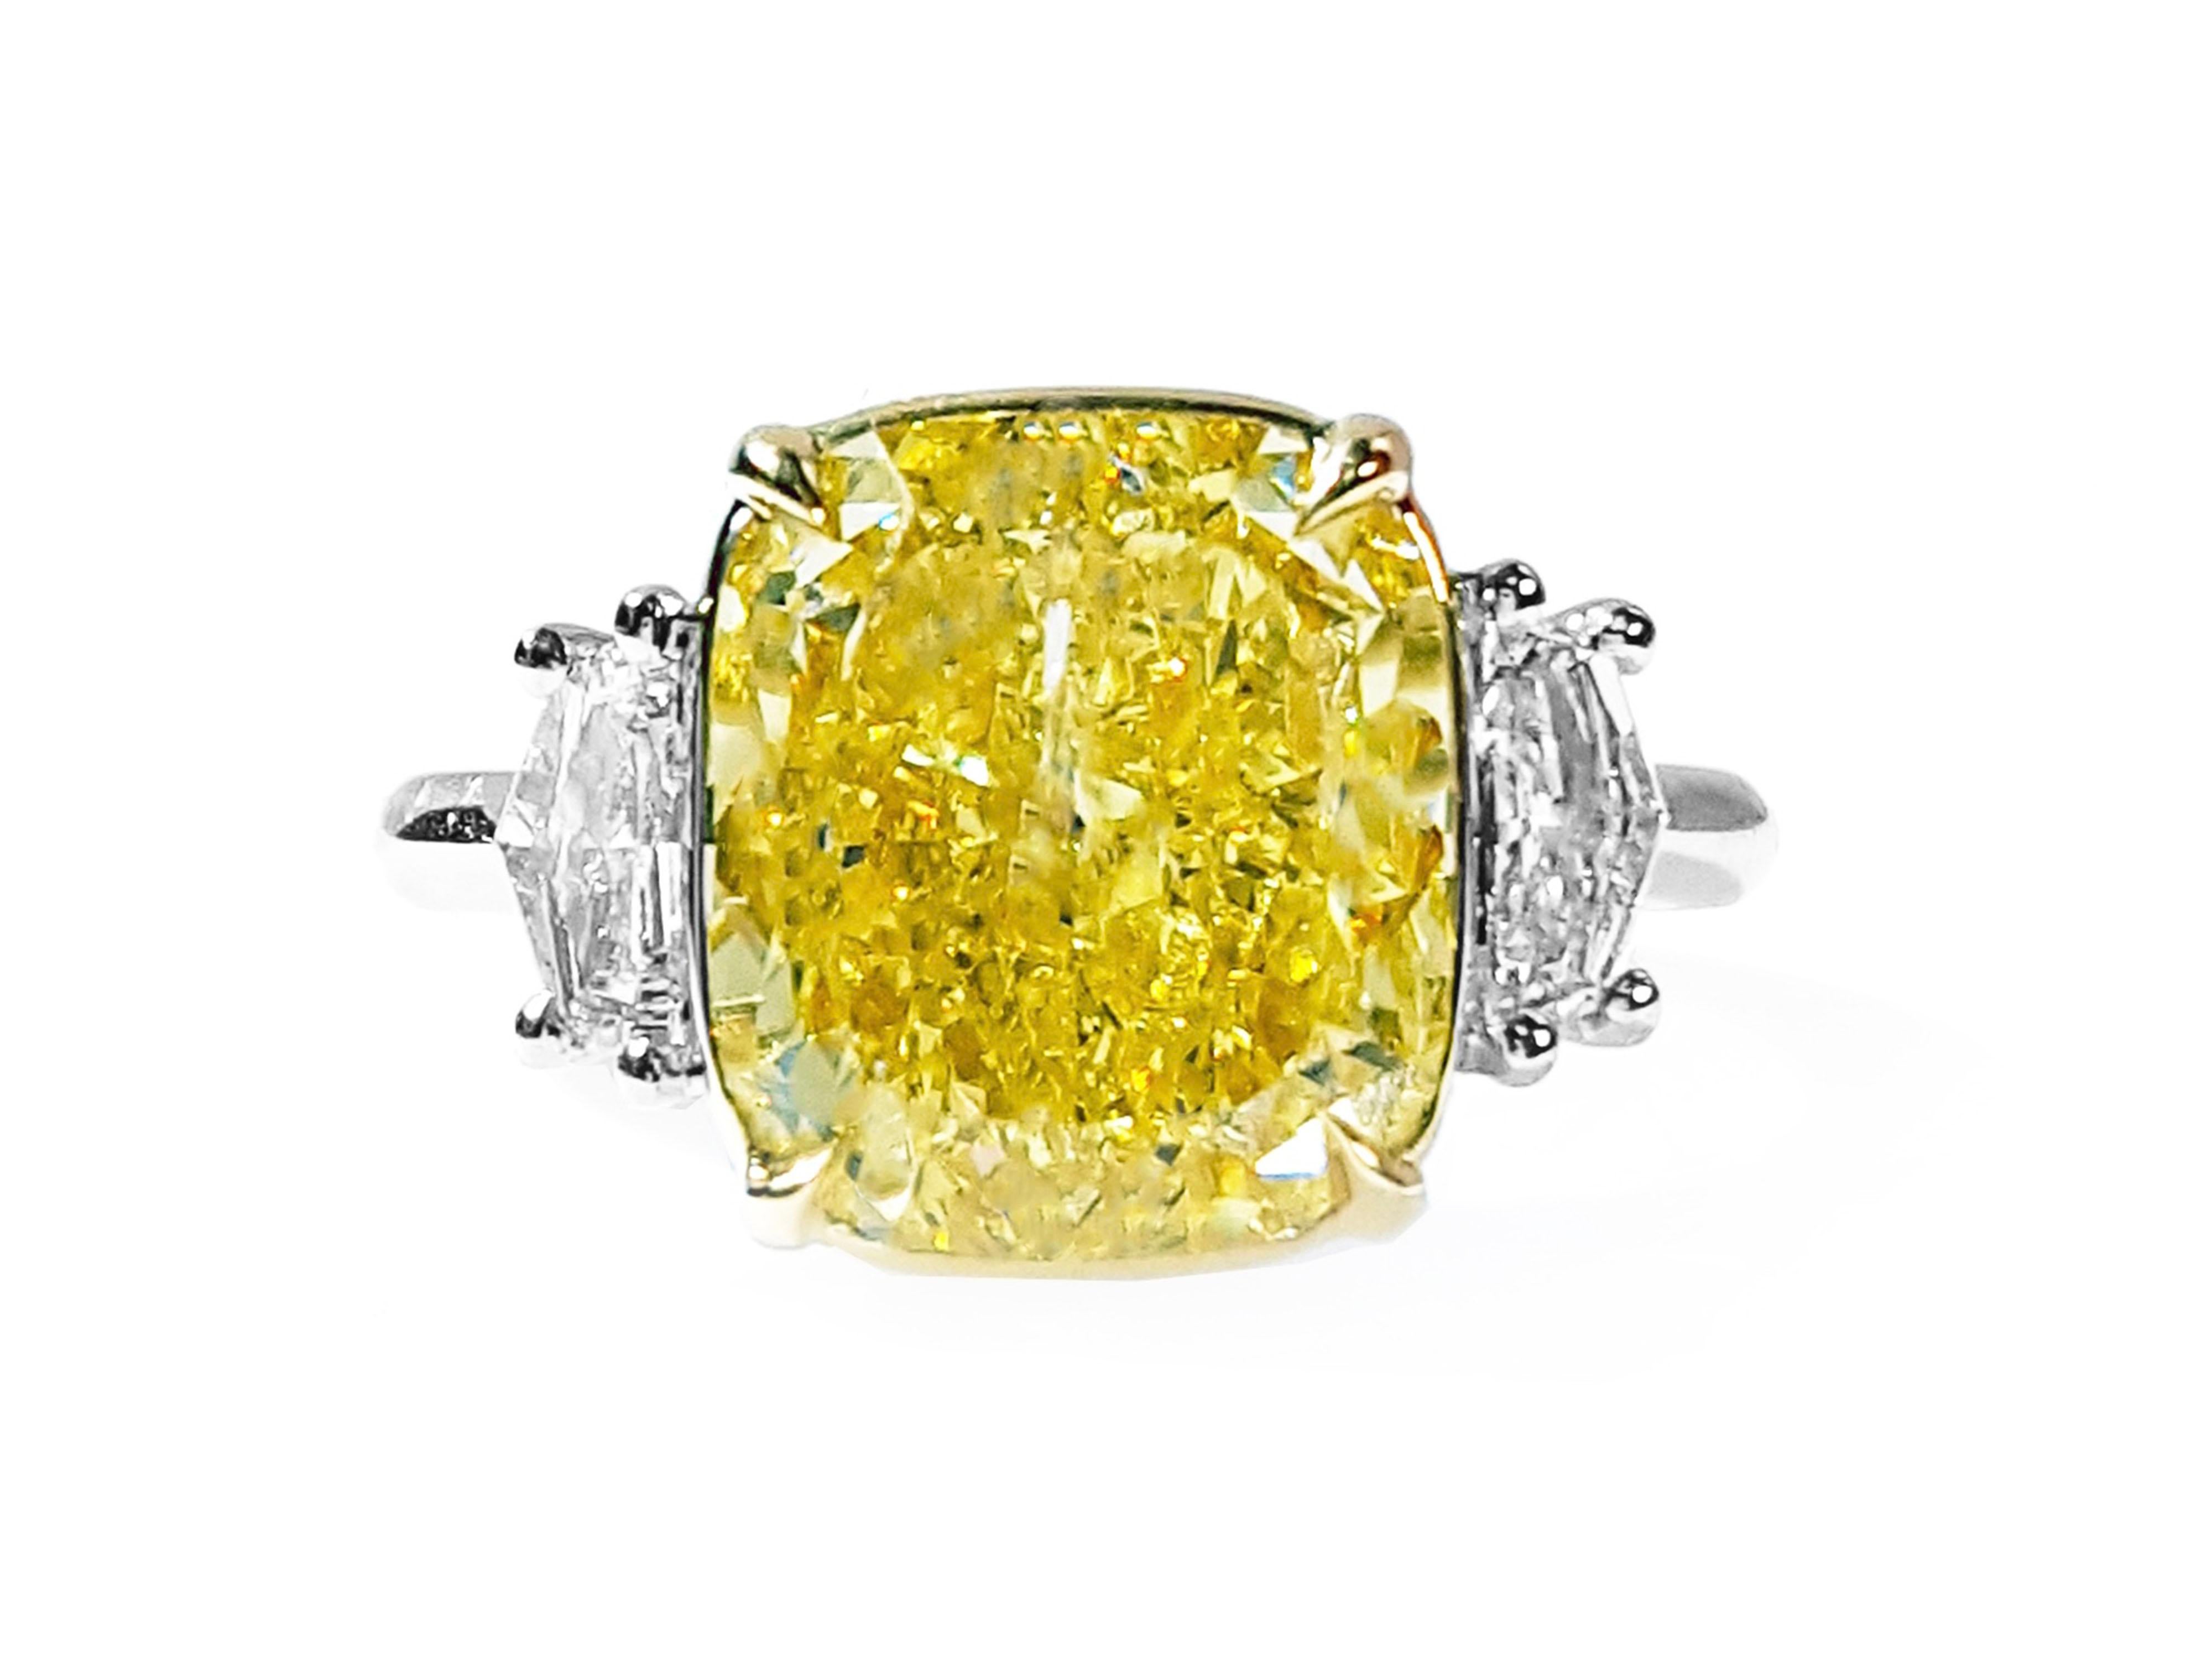 Contemporary 6.50 Carat Fancy Intense Yellow Diamond Engagement Ring in Platinum, GIA Report For Sale